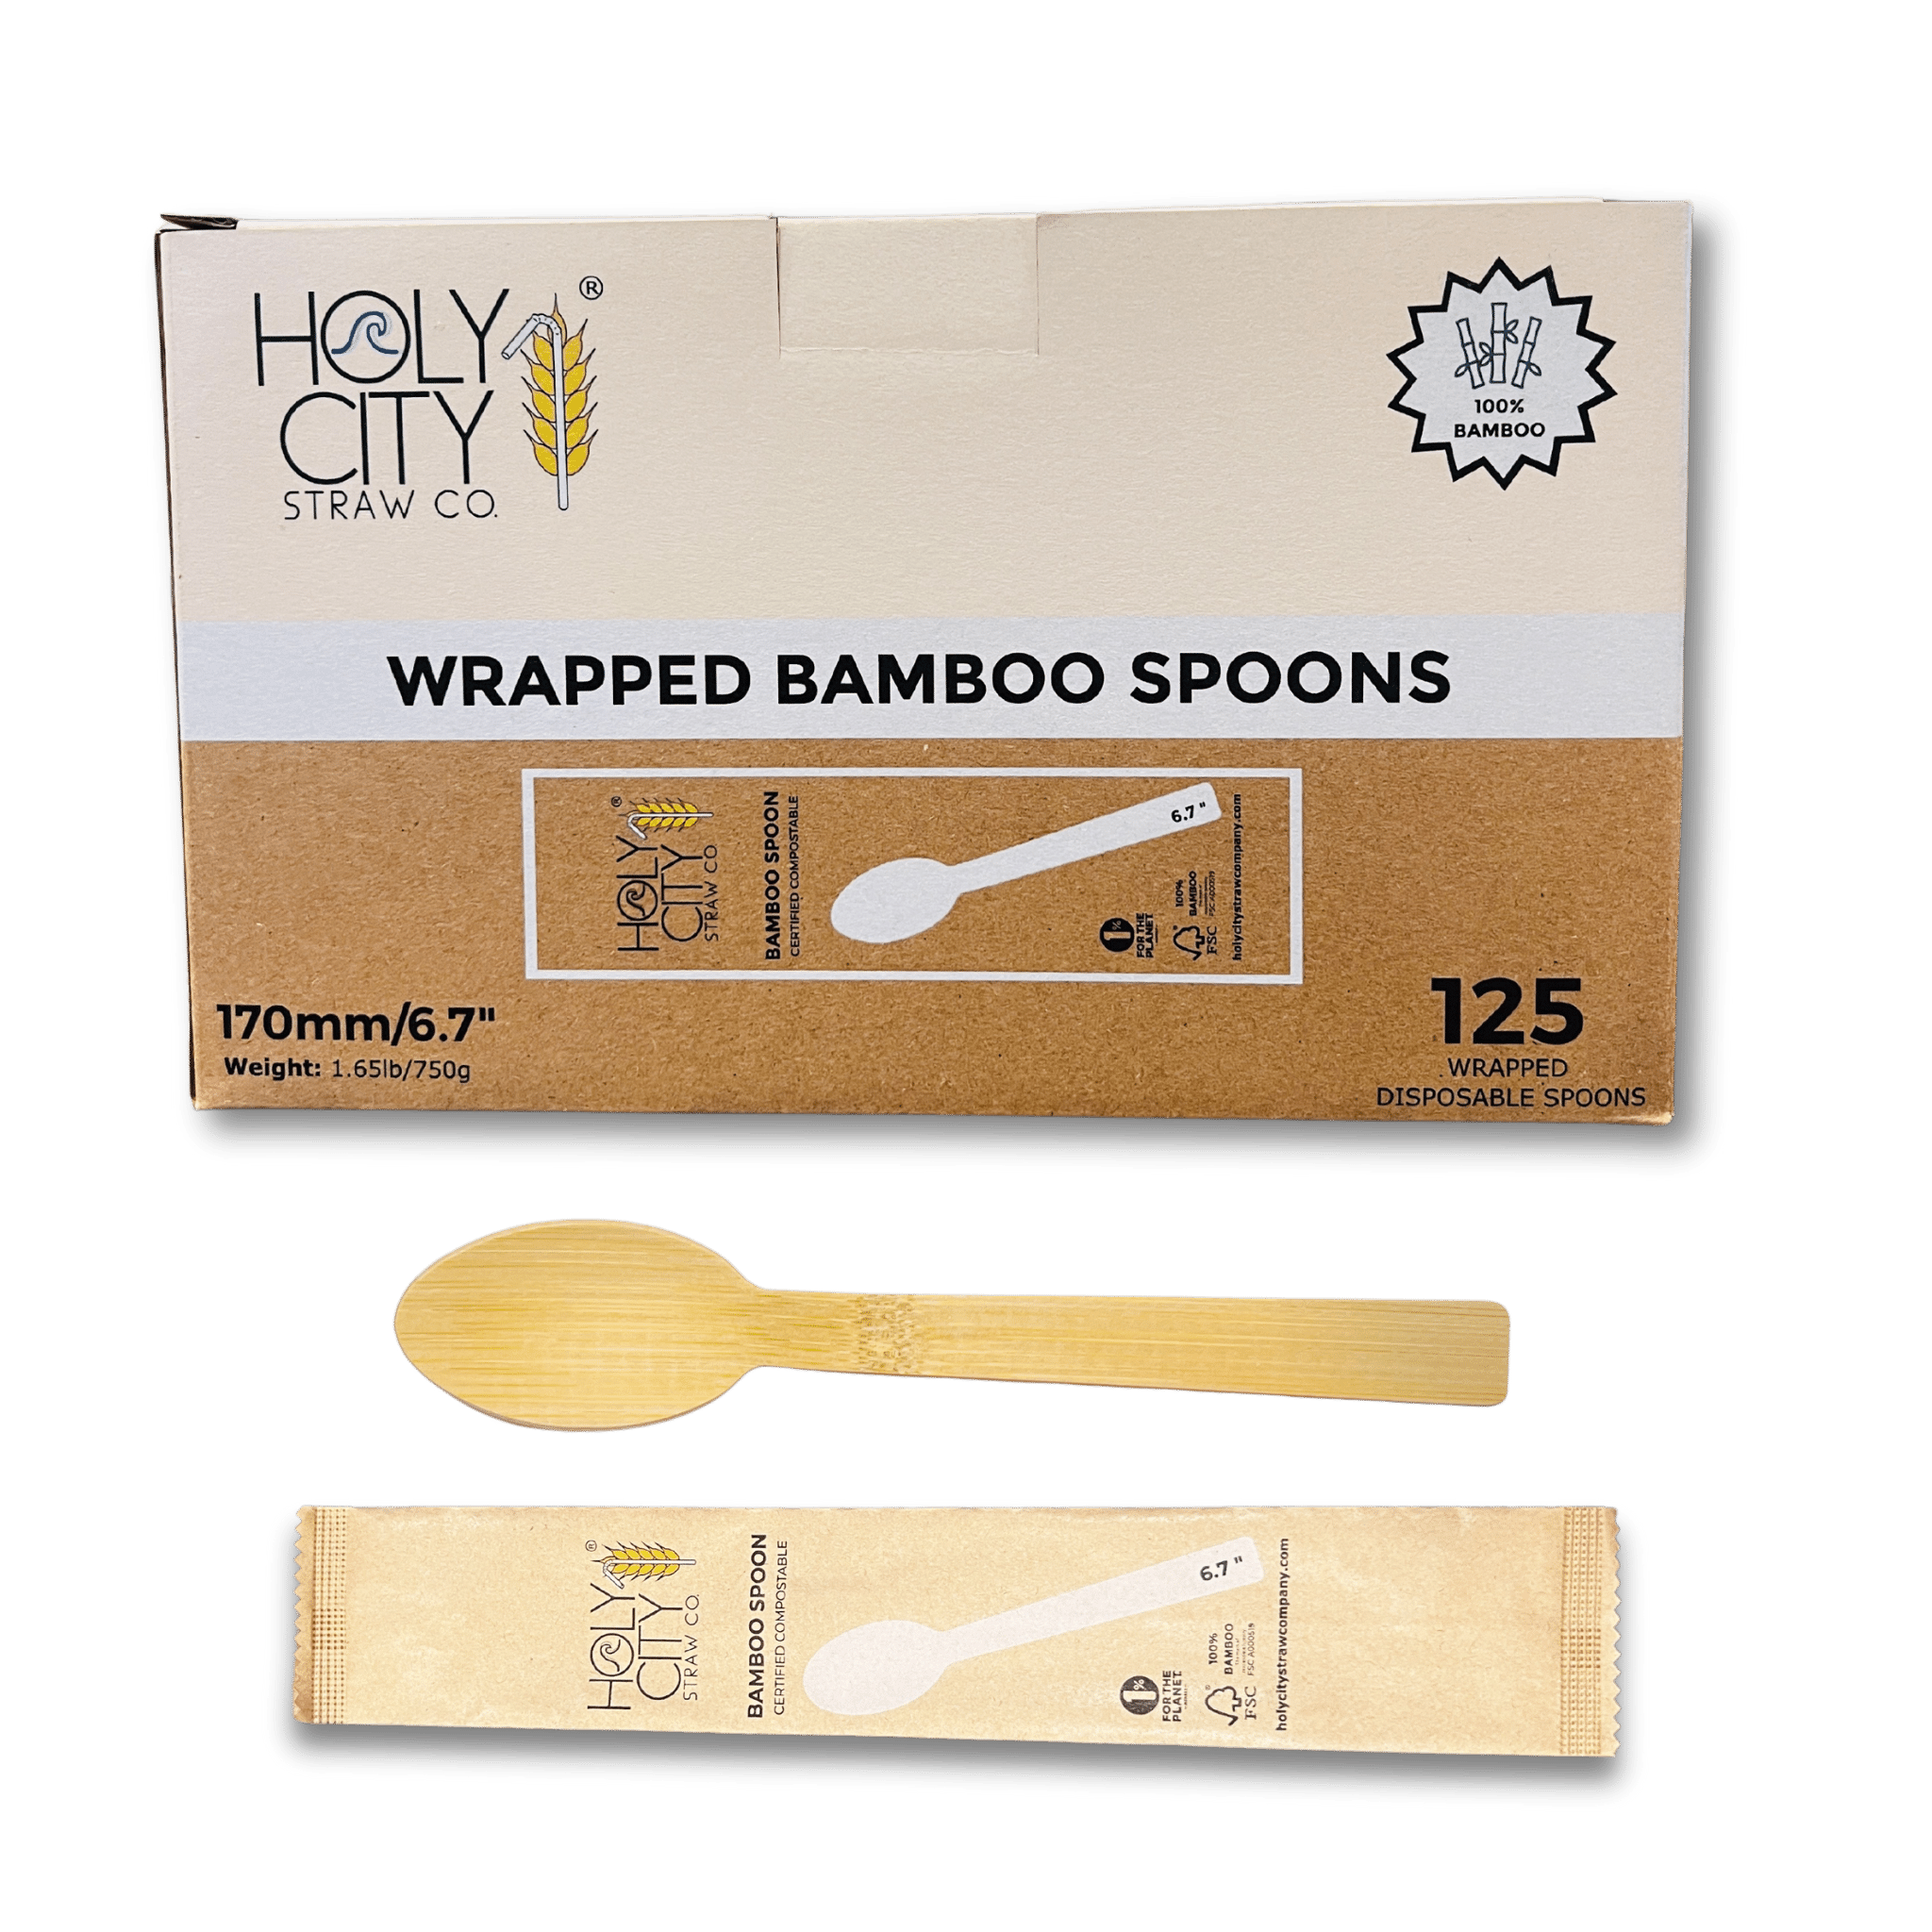 Box of Holy City Straw Company Wrapped Bamboo Spoons 125 disposable spoons each individually wrapped